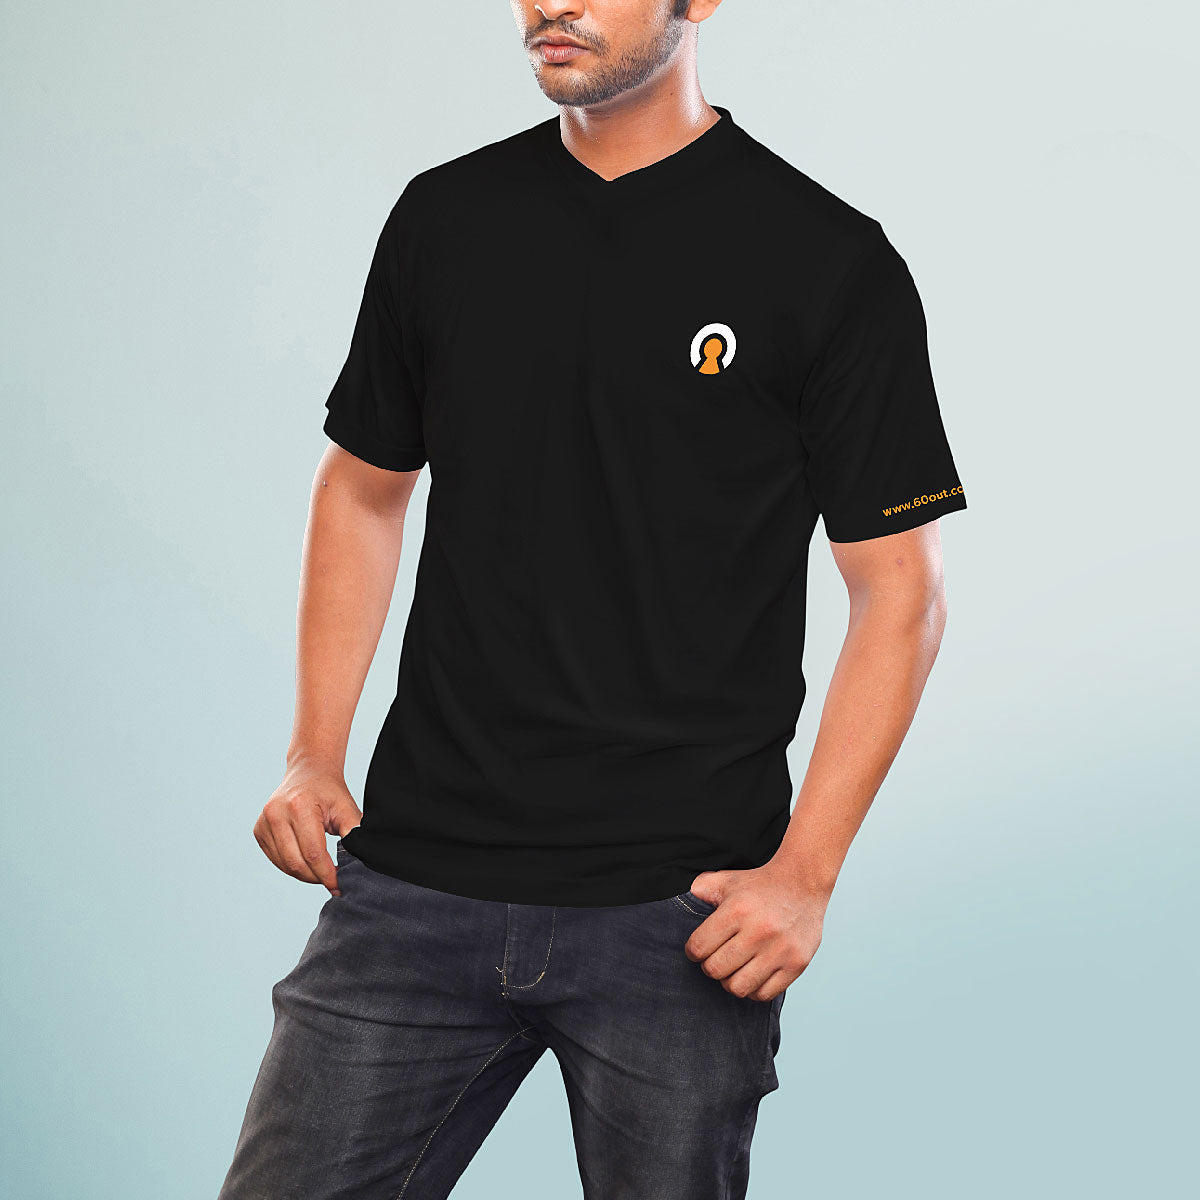 60out Classic T-shirt (Black)